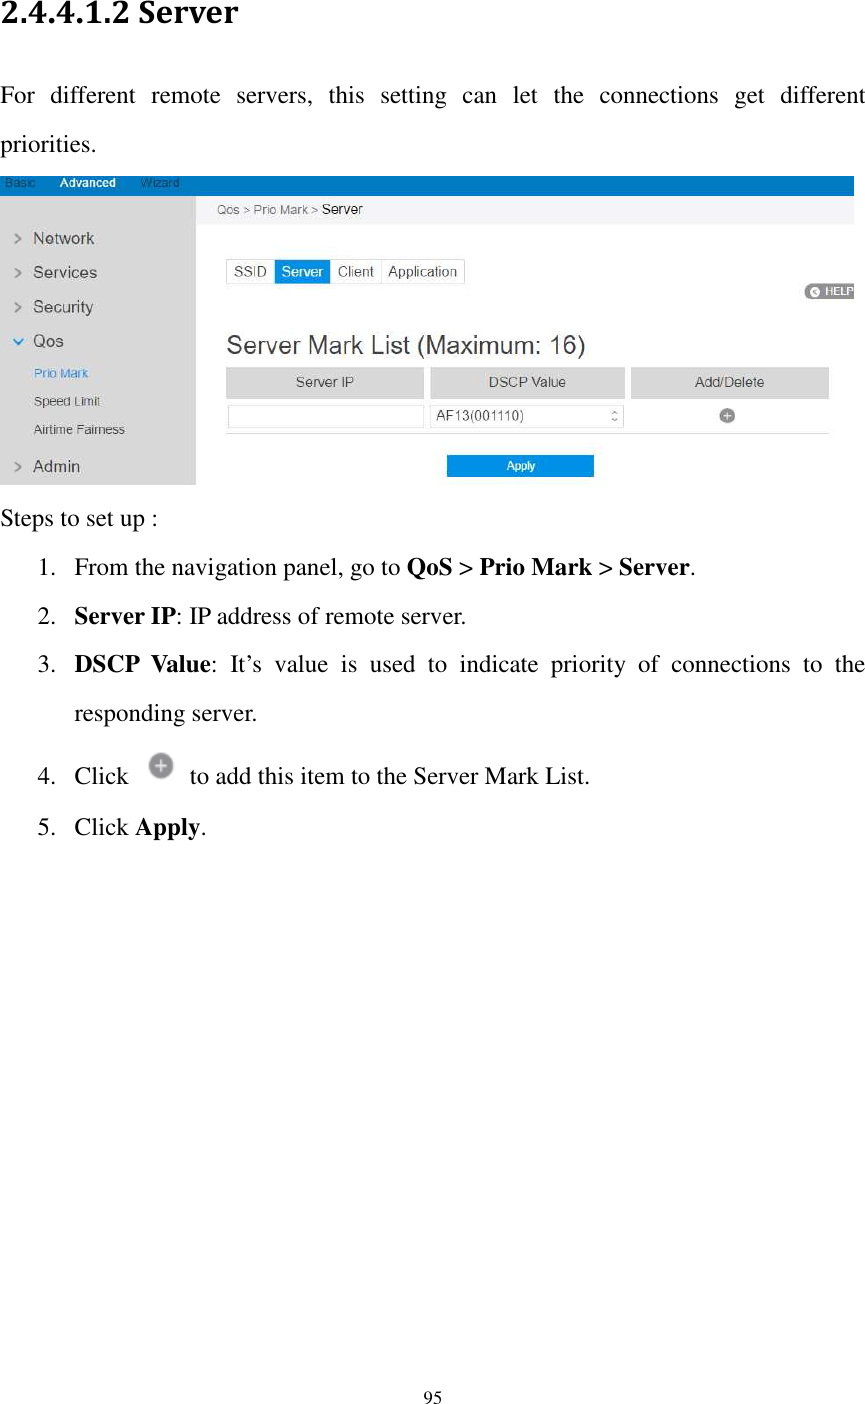  95  2.4.4.1.2 Server For  different  remote  servers,  this  setting  can  let  the  connections  get  different priorities.  Steps to set up : 1. From the navigation panel, go to QoS &gt; Prio Mark &gt; Server.   2. Server IP: IP address of remote server.   3. DSCP  Value:  It’s  value  is  used  to  indicate  priority  of  connections  to  the responding server.   4. Click    to add this item to the Server Mark List. 5. Click Apply. 